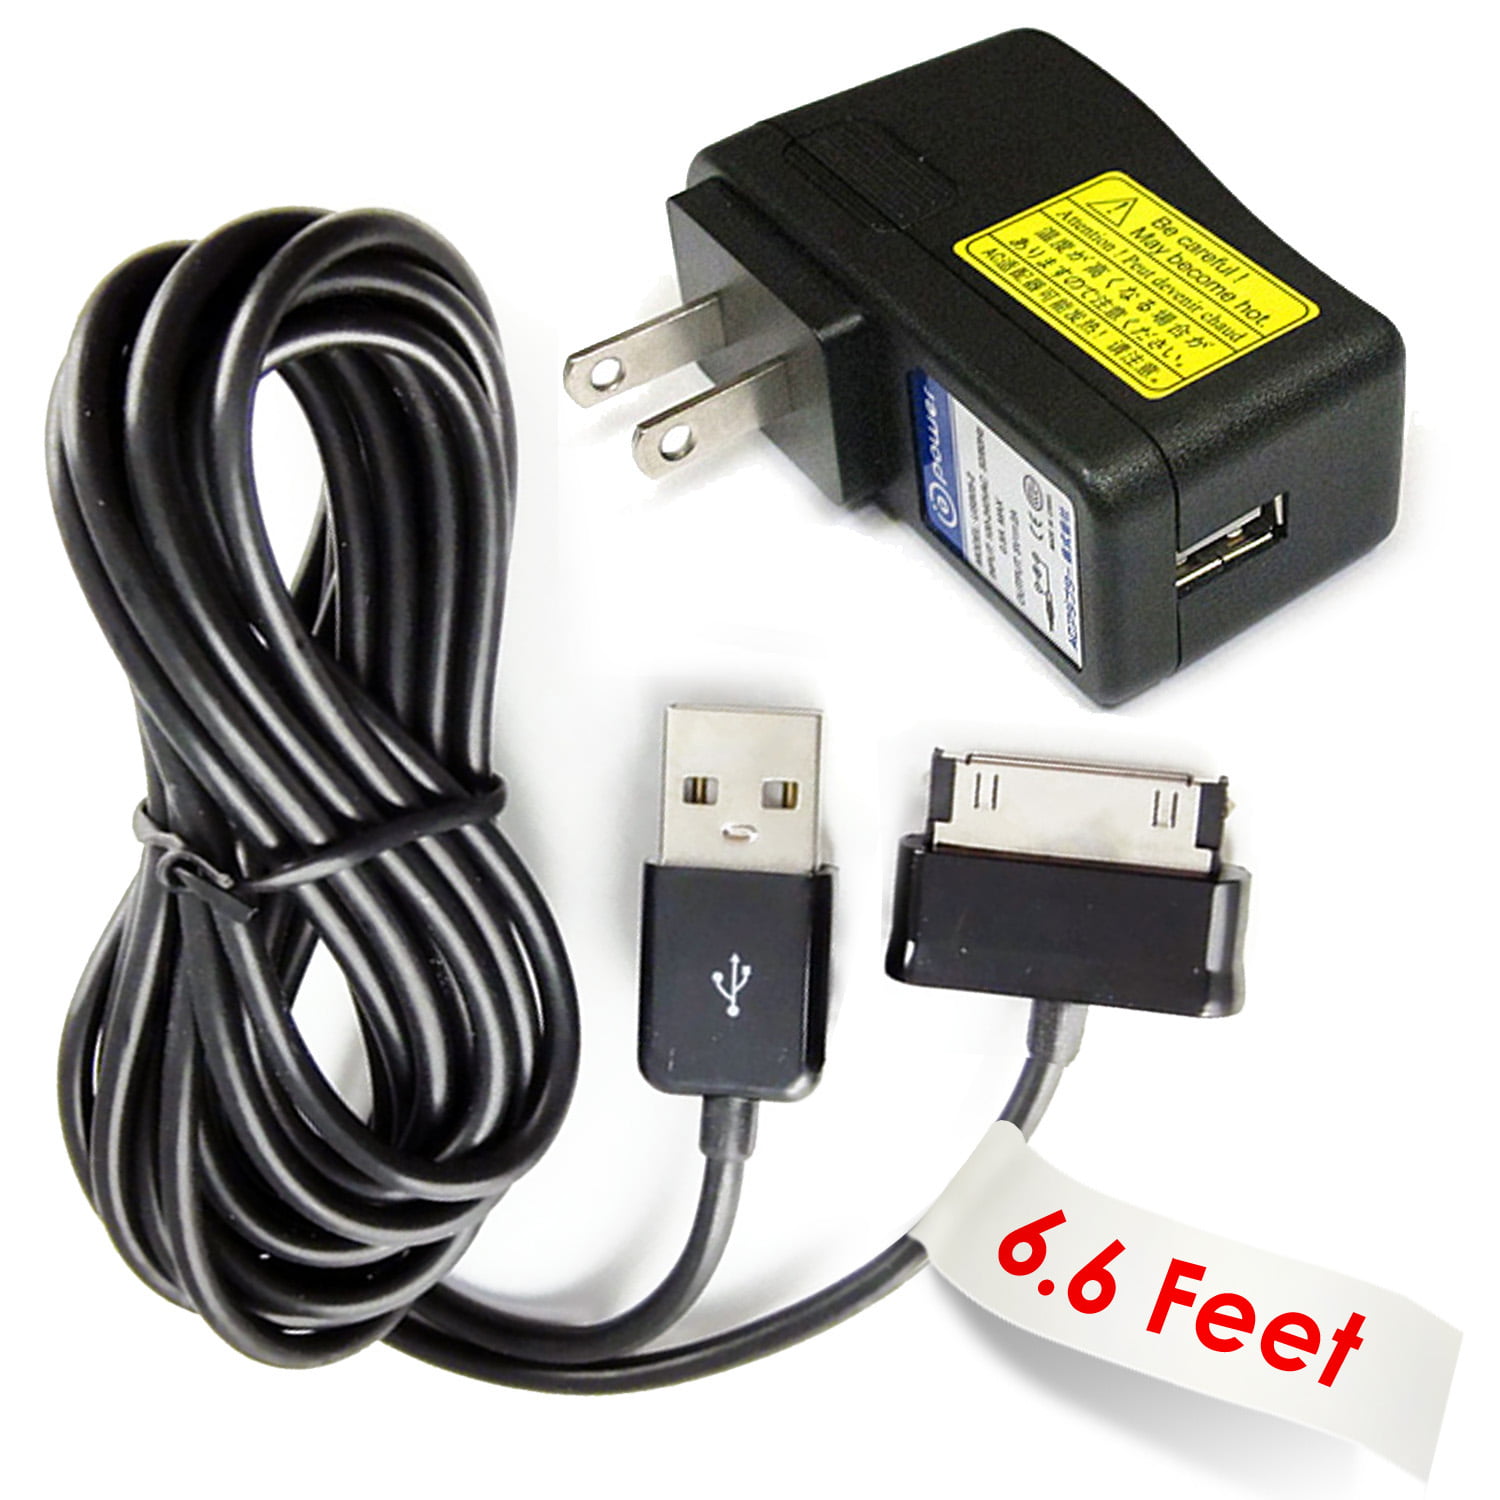 2.1A Wall AC Home Charger+USB Cord for Samsung Galaxy Tab 10.1 GT-P7510UW Tablet